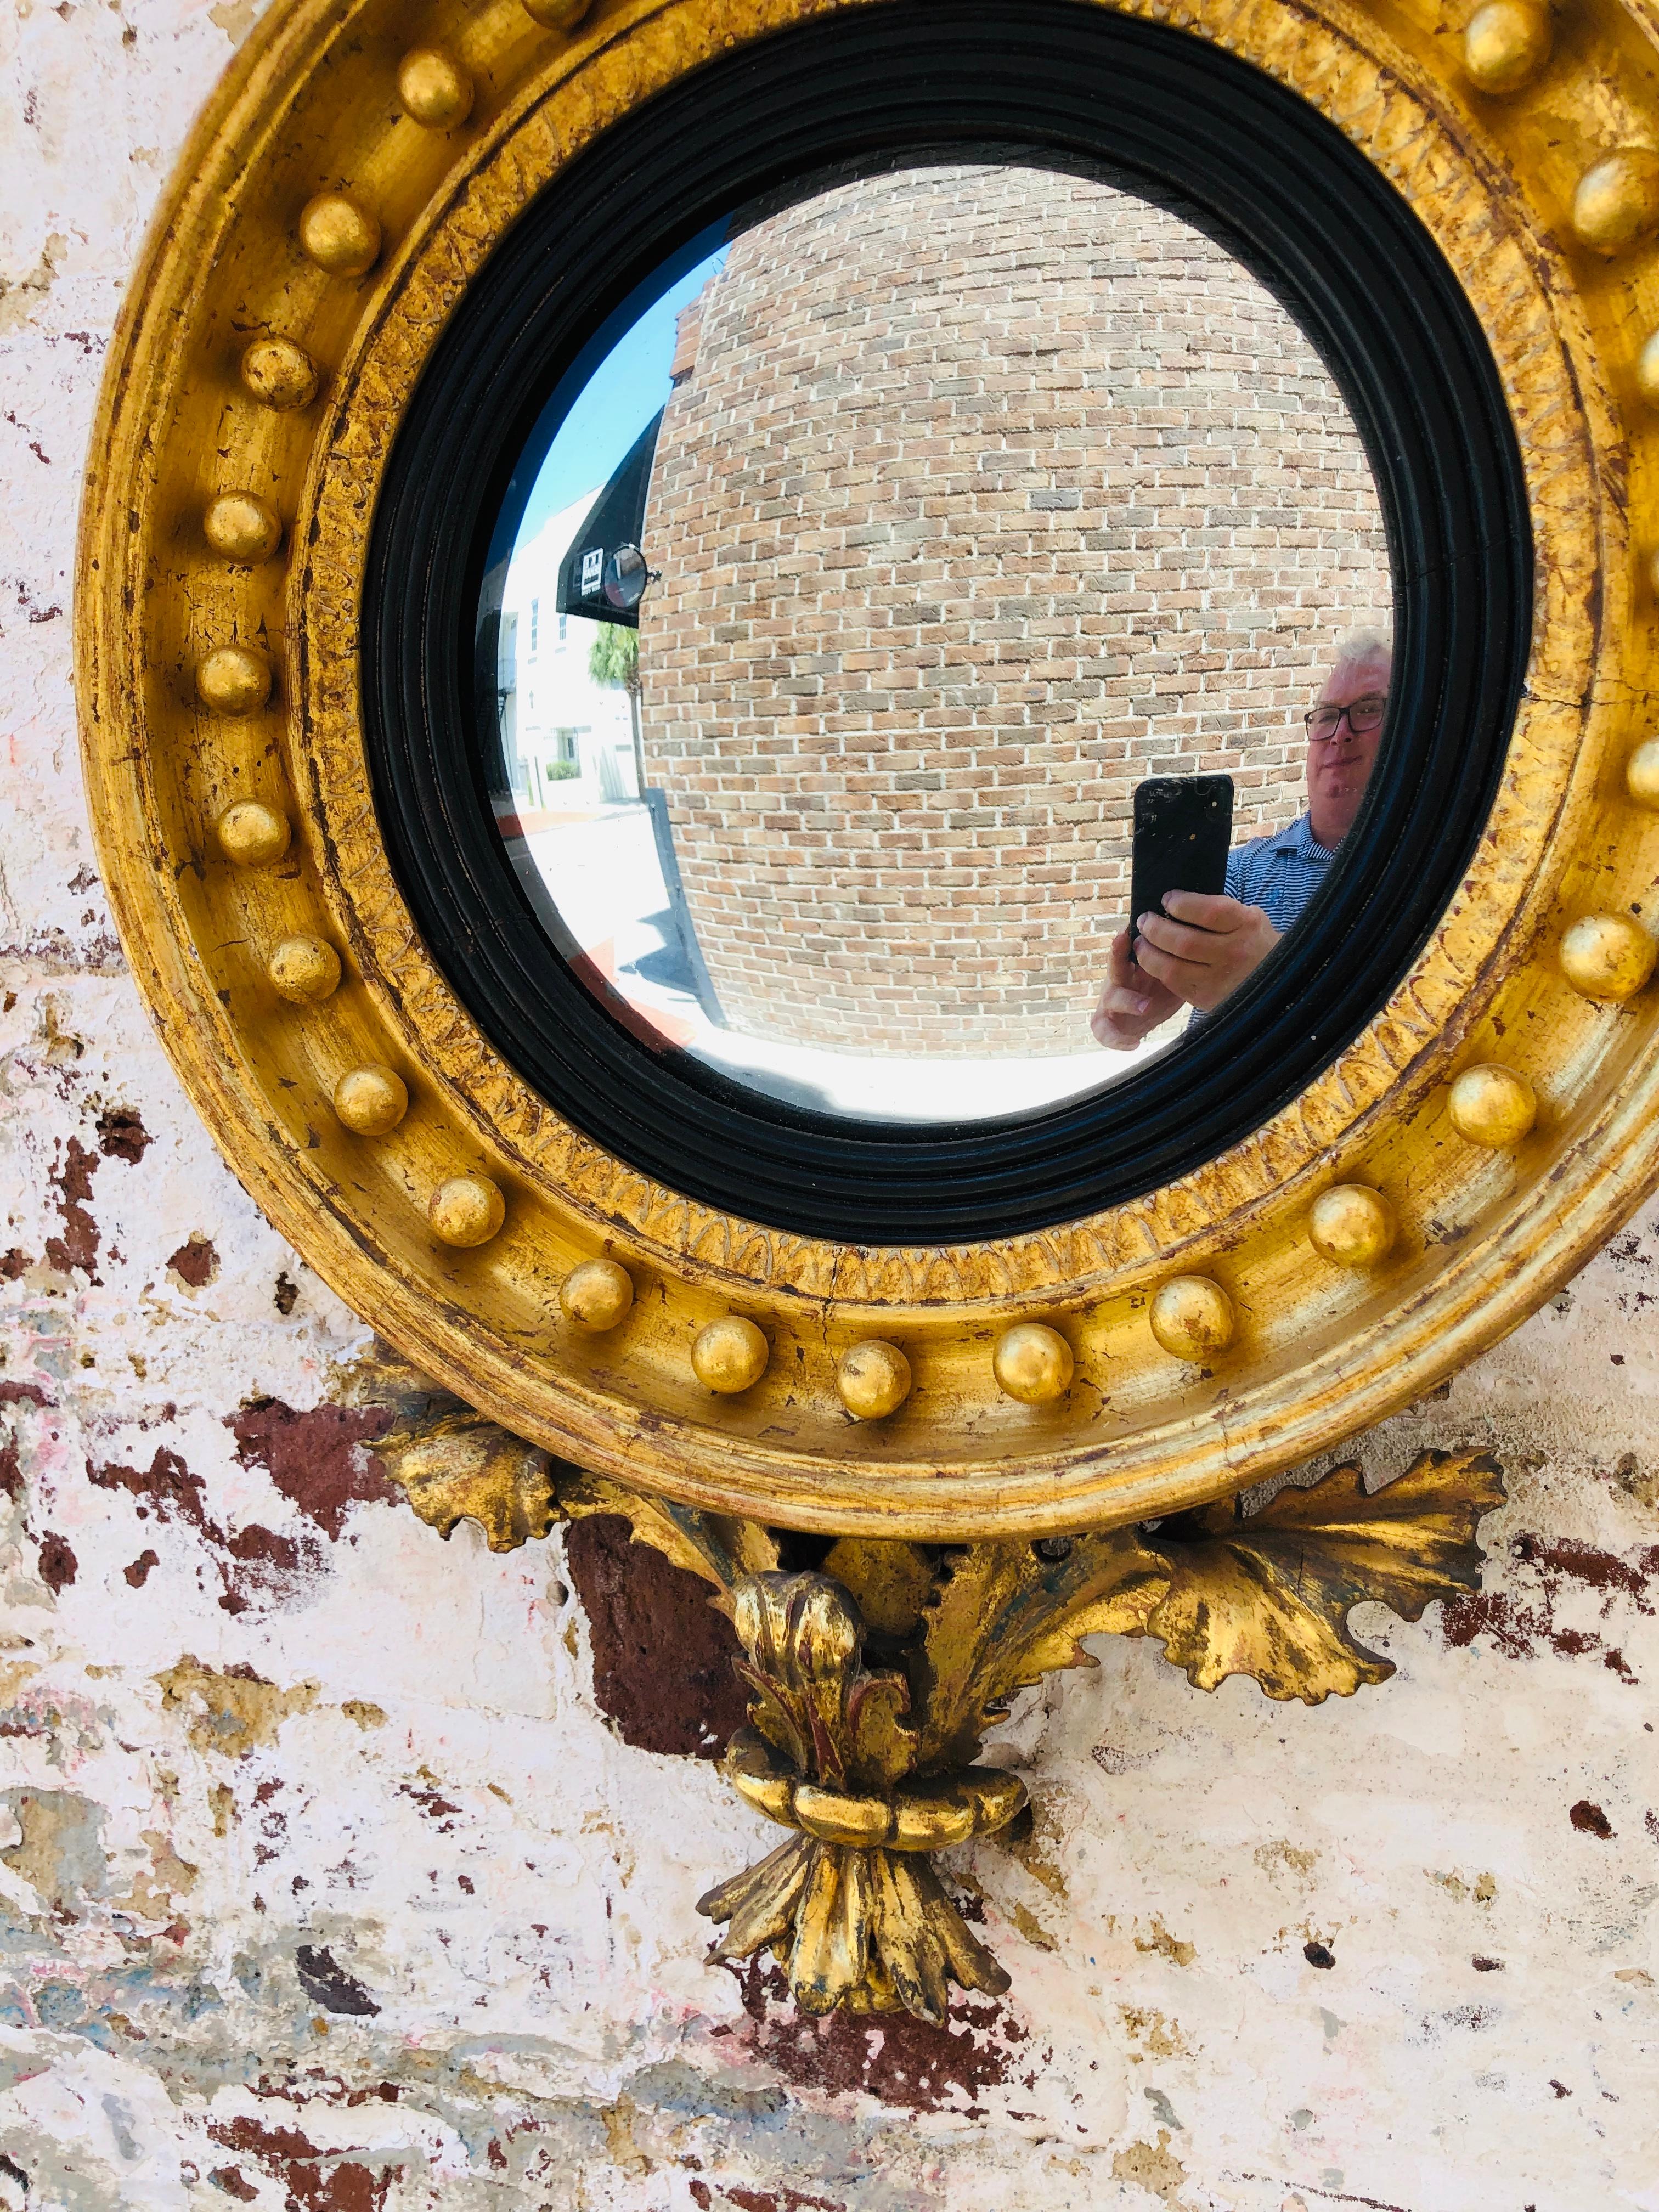 Regency Small Scale English Convex Mirror with London Makers Stamp, circa 1820